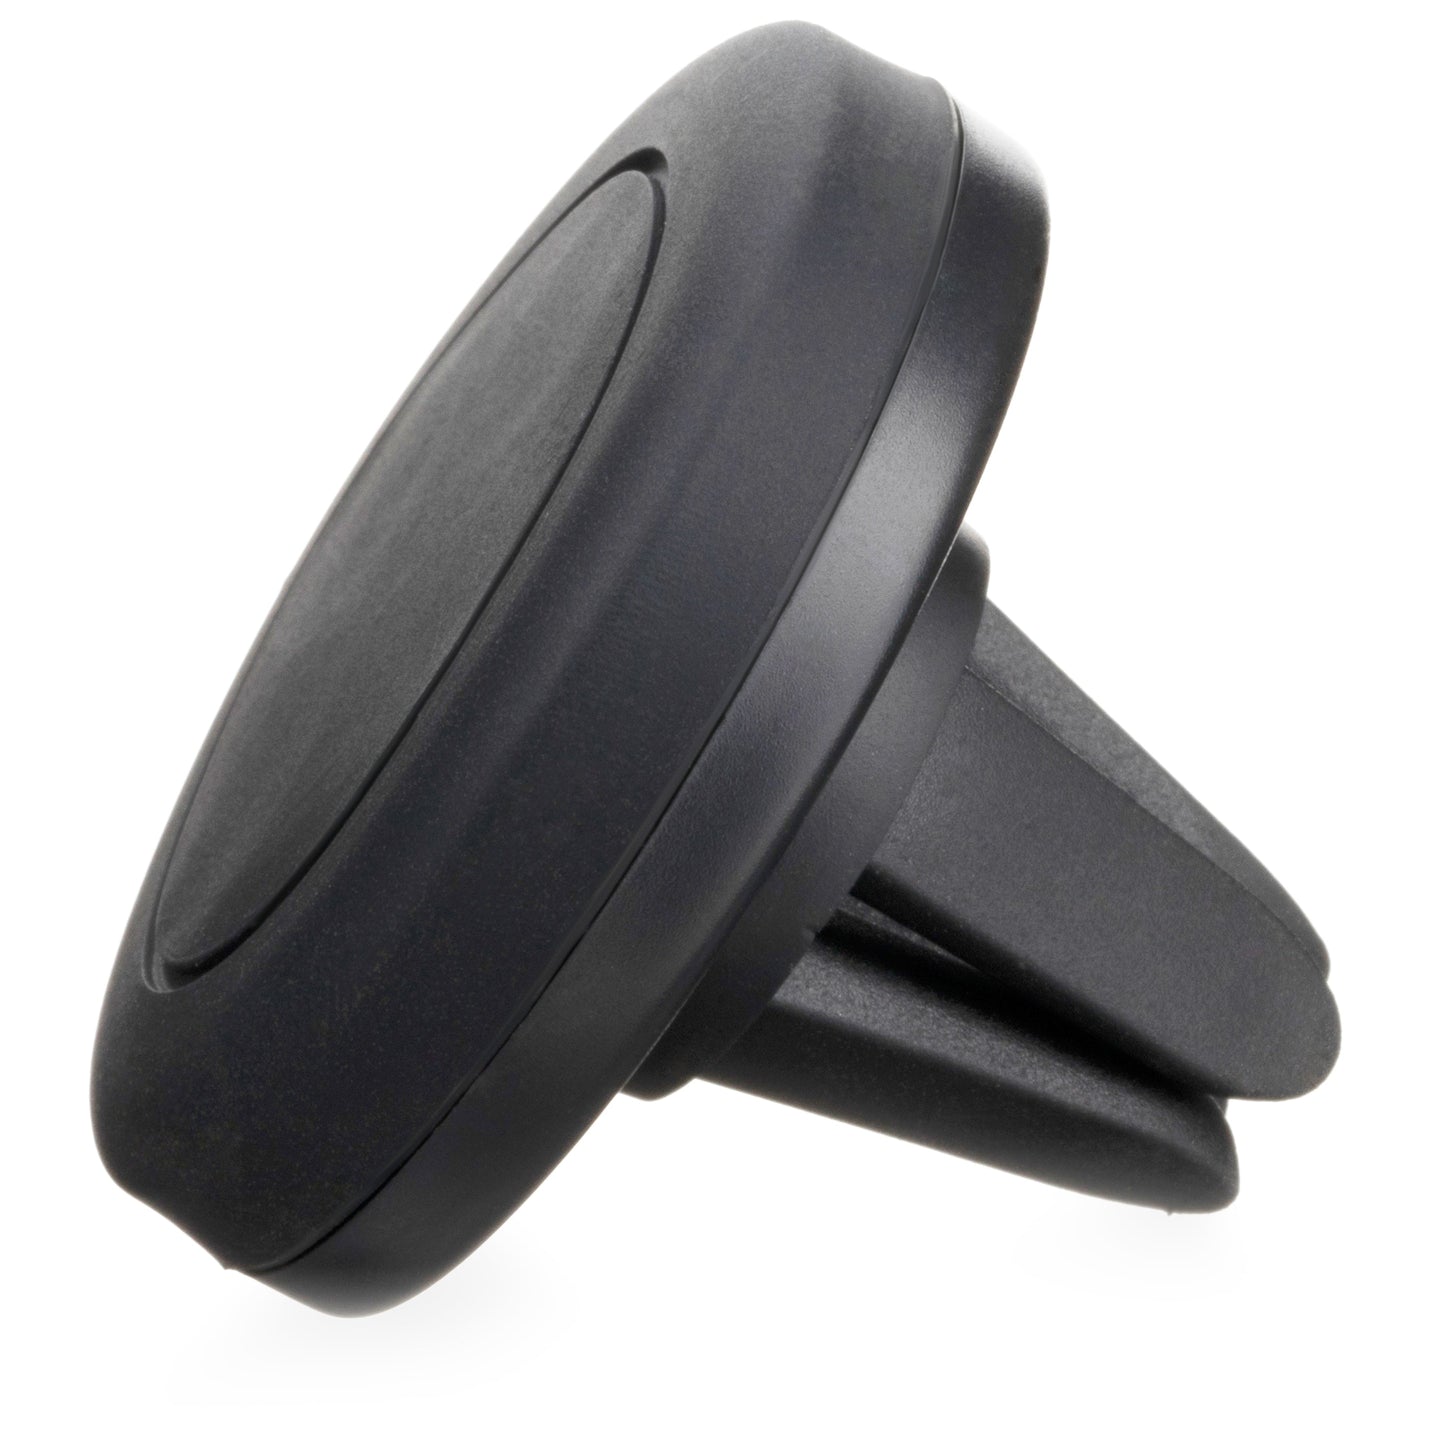 VMMAG5 | Universal Smartphone Car Air Vent Magnetic Mount with 4 Prong Vent Clip